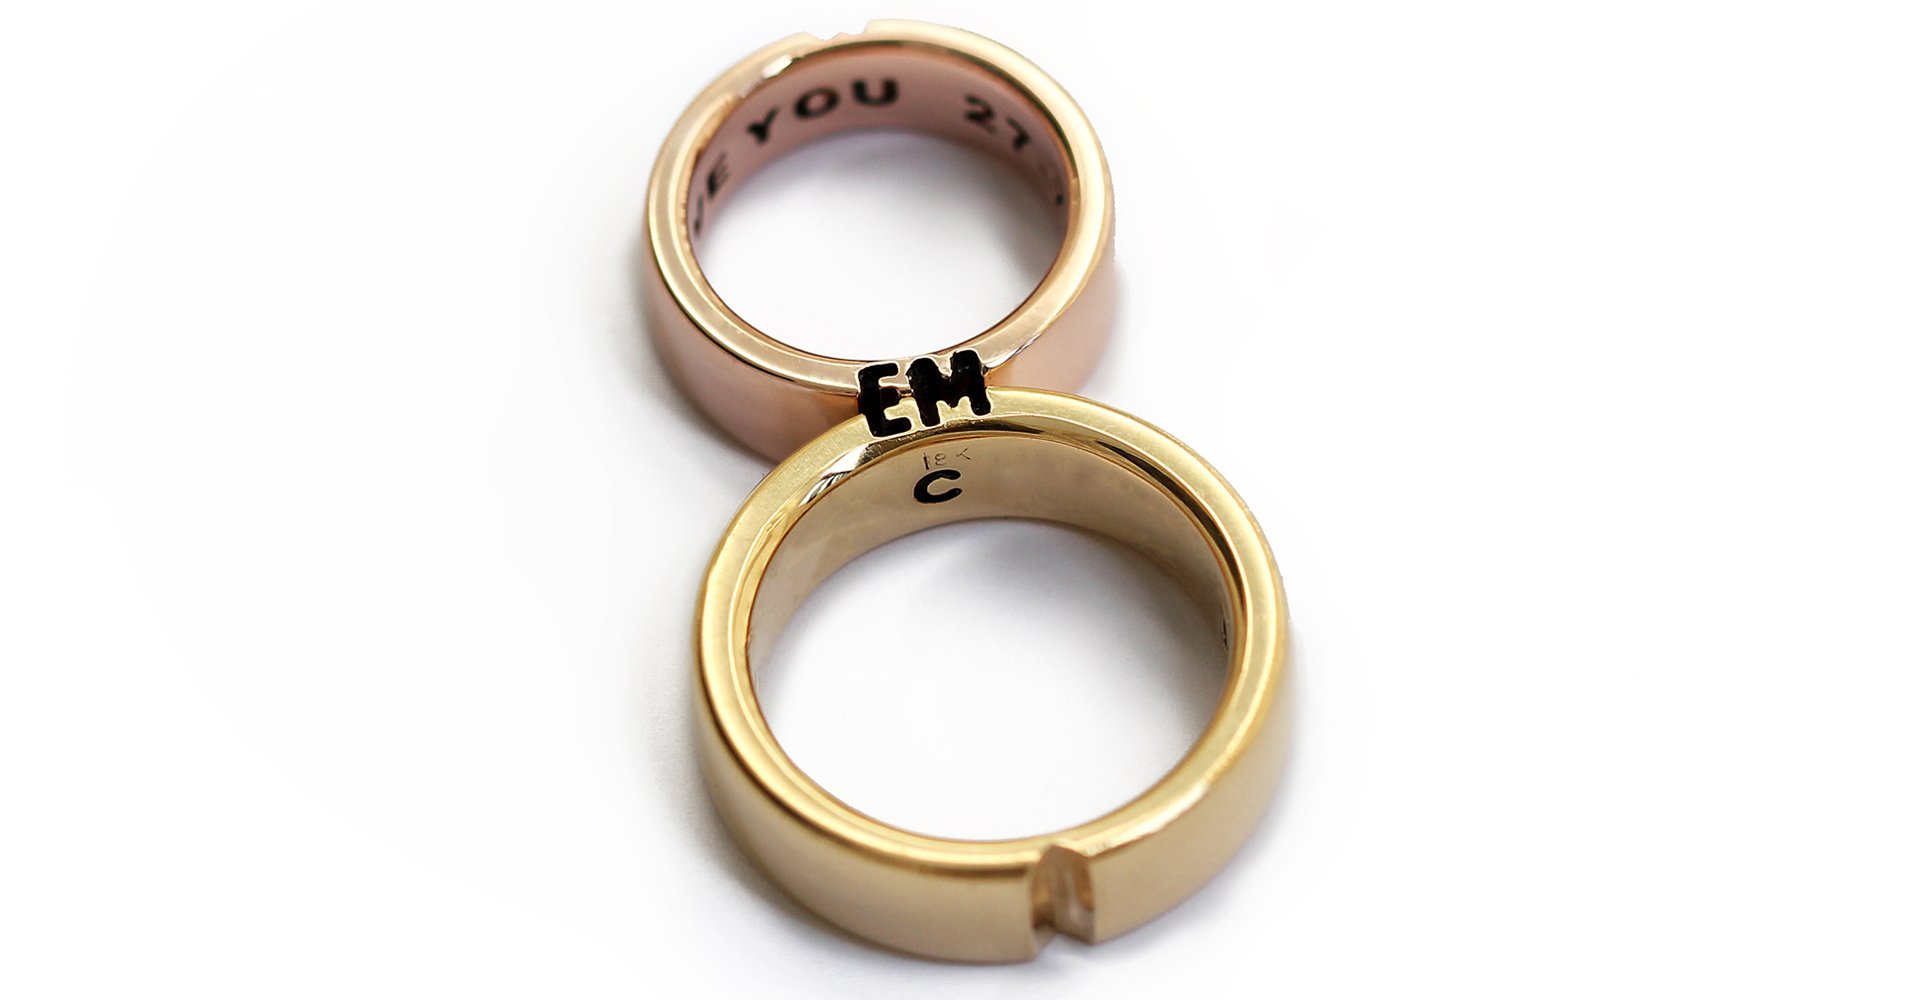 Stainless Steel Heart Shaped Gold Heart Couple Ring Set For Forever Love  Promise, Wedding, Engagement, Anniversary Gift For Lovers From Hallo713119,  $8.05 | DHgate.Com